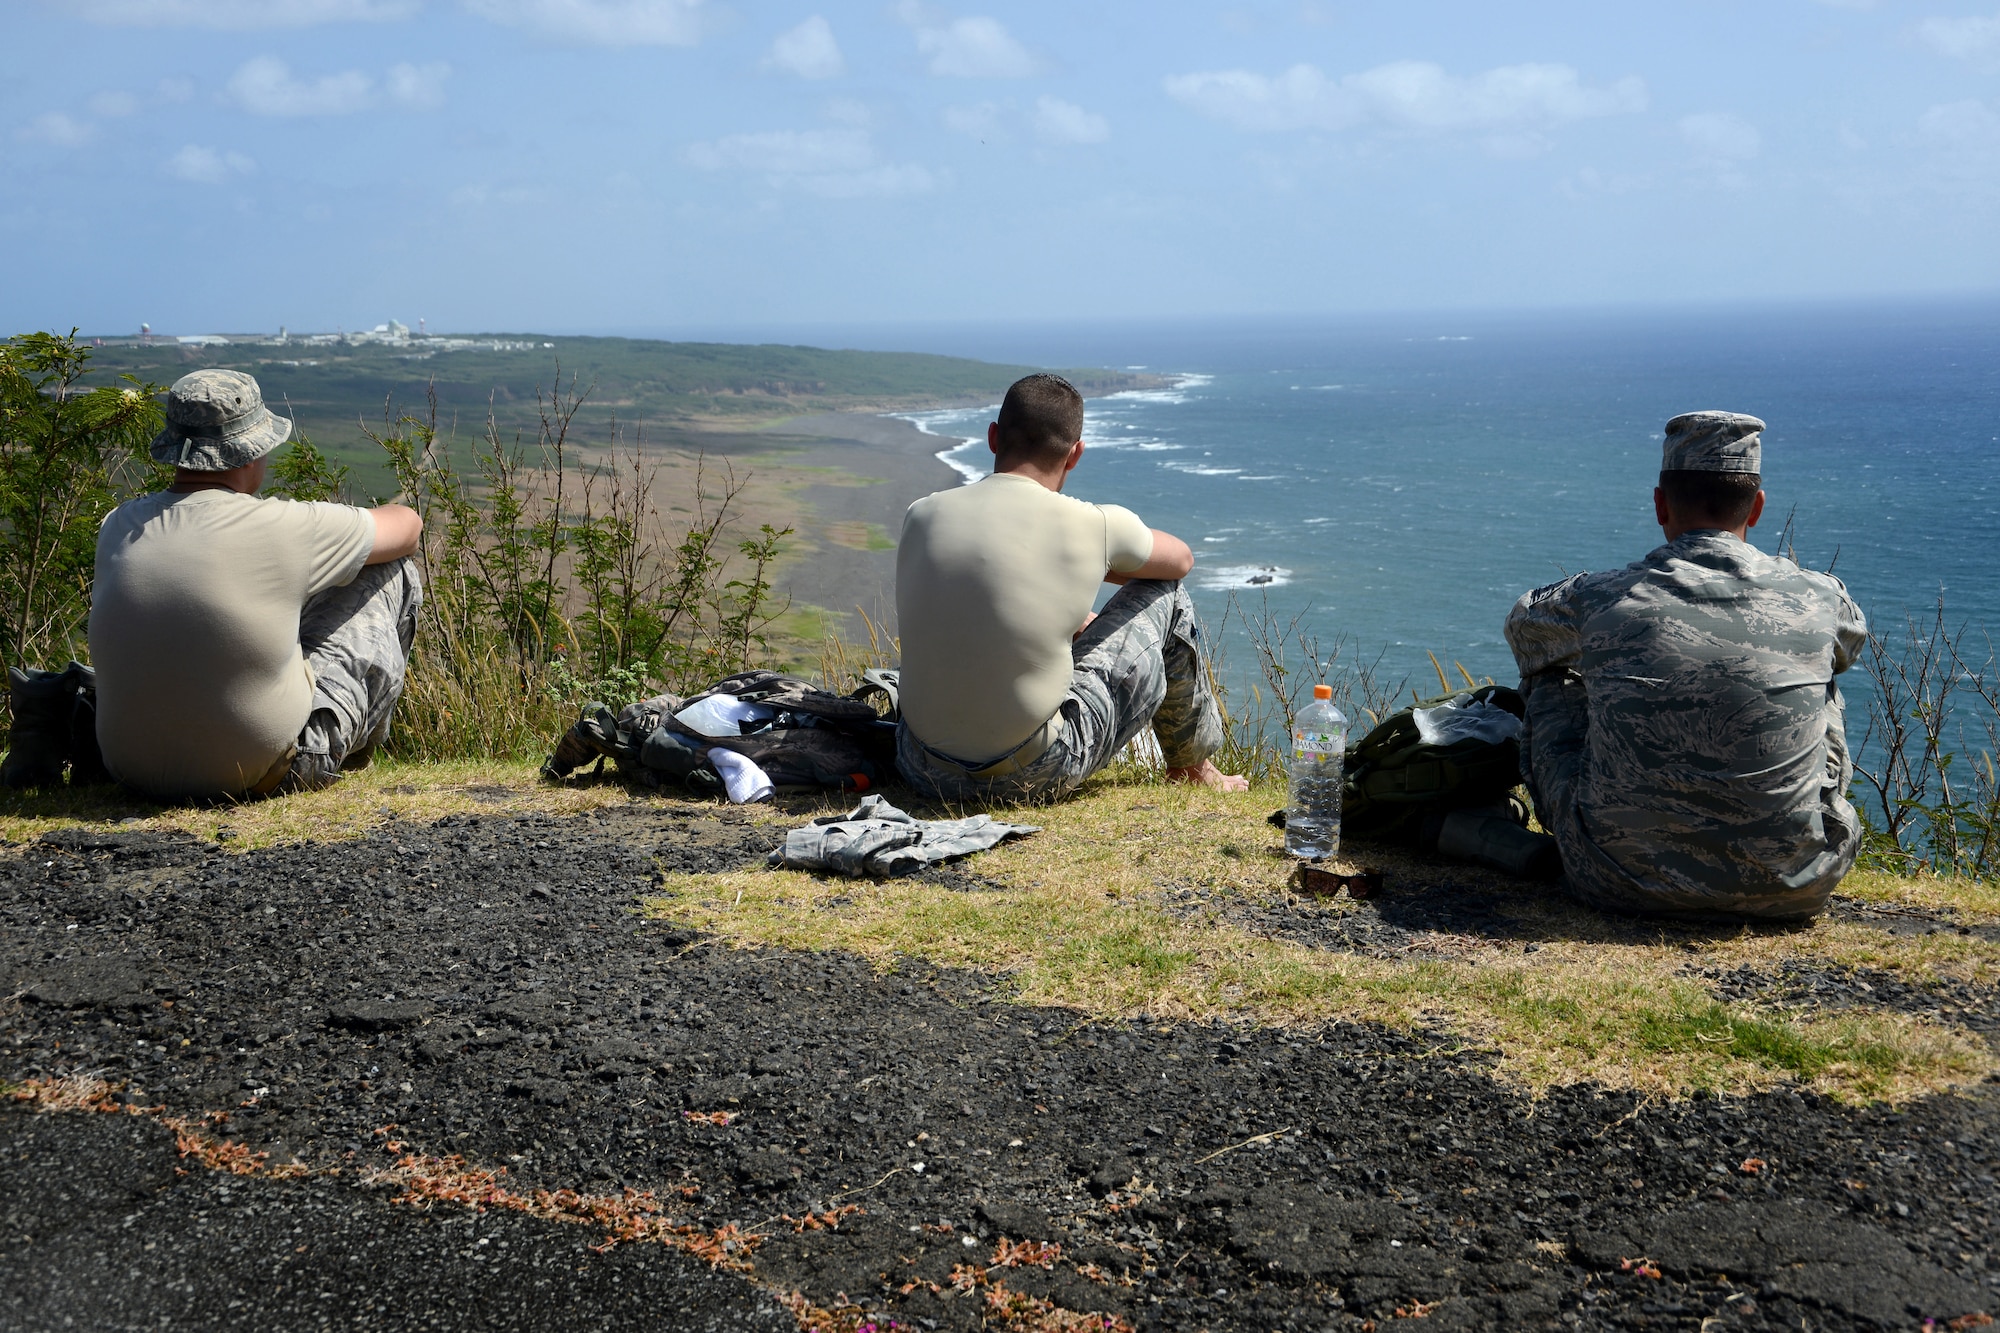 Members of the 18th Medical Group look out over the edge of Mount Suribachi after having hiked to the top during a professional development trip to Iwo To, Japan, formerly known as Iwo Jima, March 18, 2013. The trip included about 40 Airmen who took part in an approximate 10-mile hike along the beaches where the Battle of Iwo Jima was fought, to the memorial commemorating those who fought and died on the island 68 years ago. (U.S. Air Force photo/Tech Sgt. Jocelyn L. Rich-Pendracki)